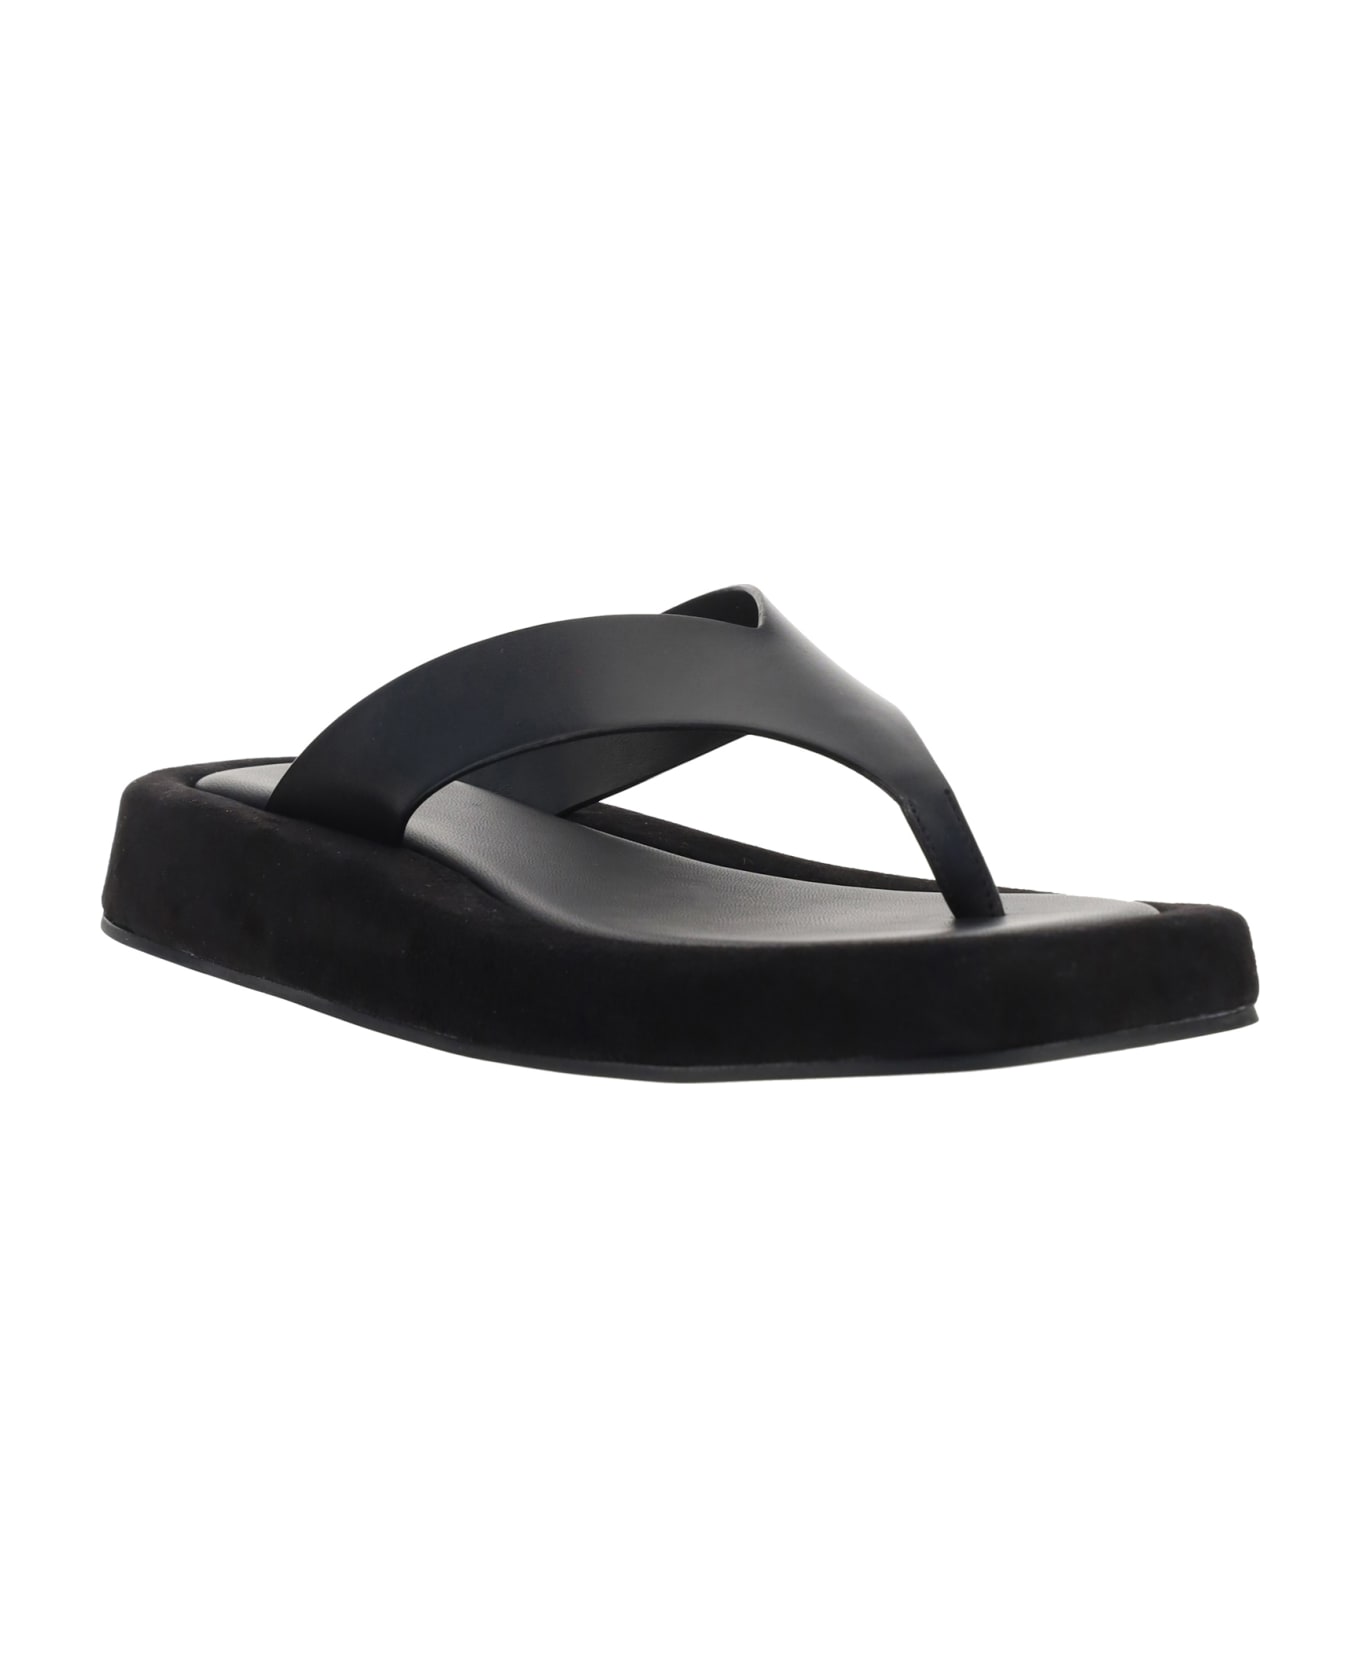 The Row Ginza Sandals - Black/black